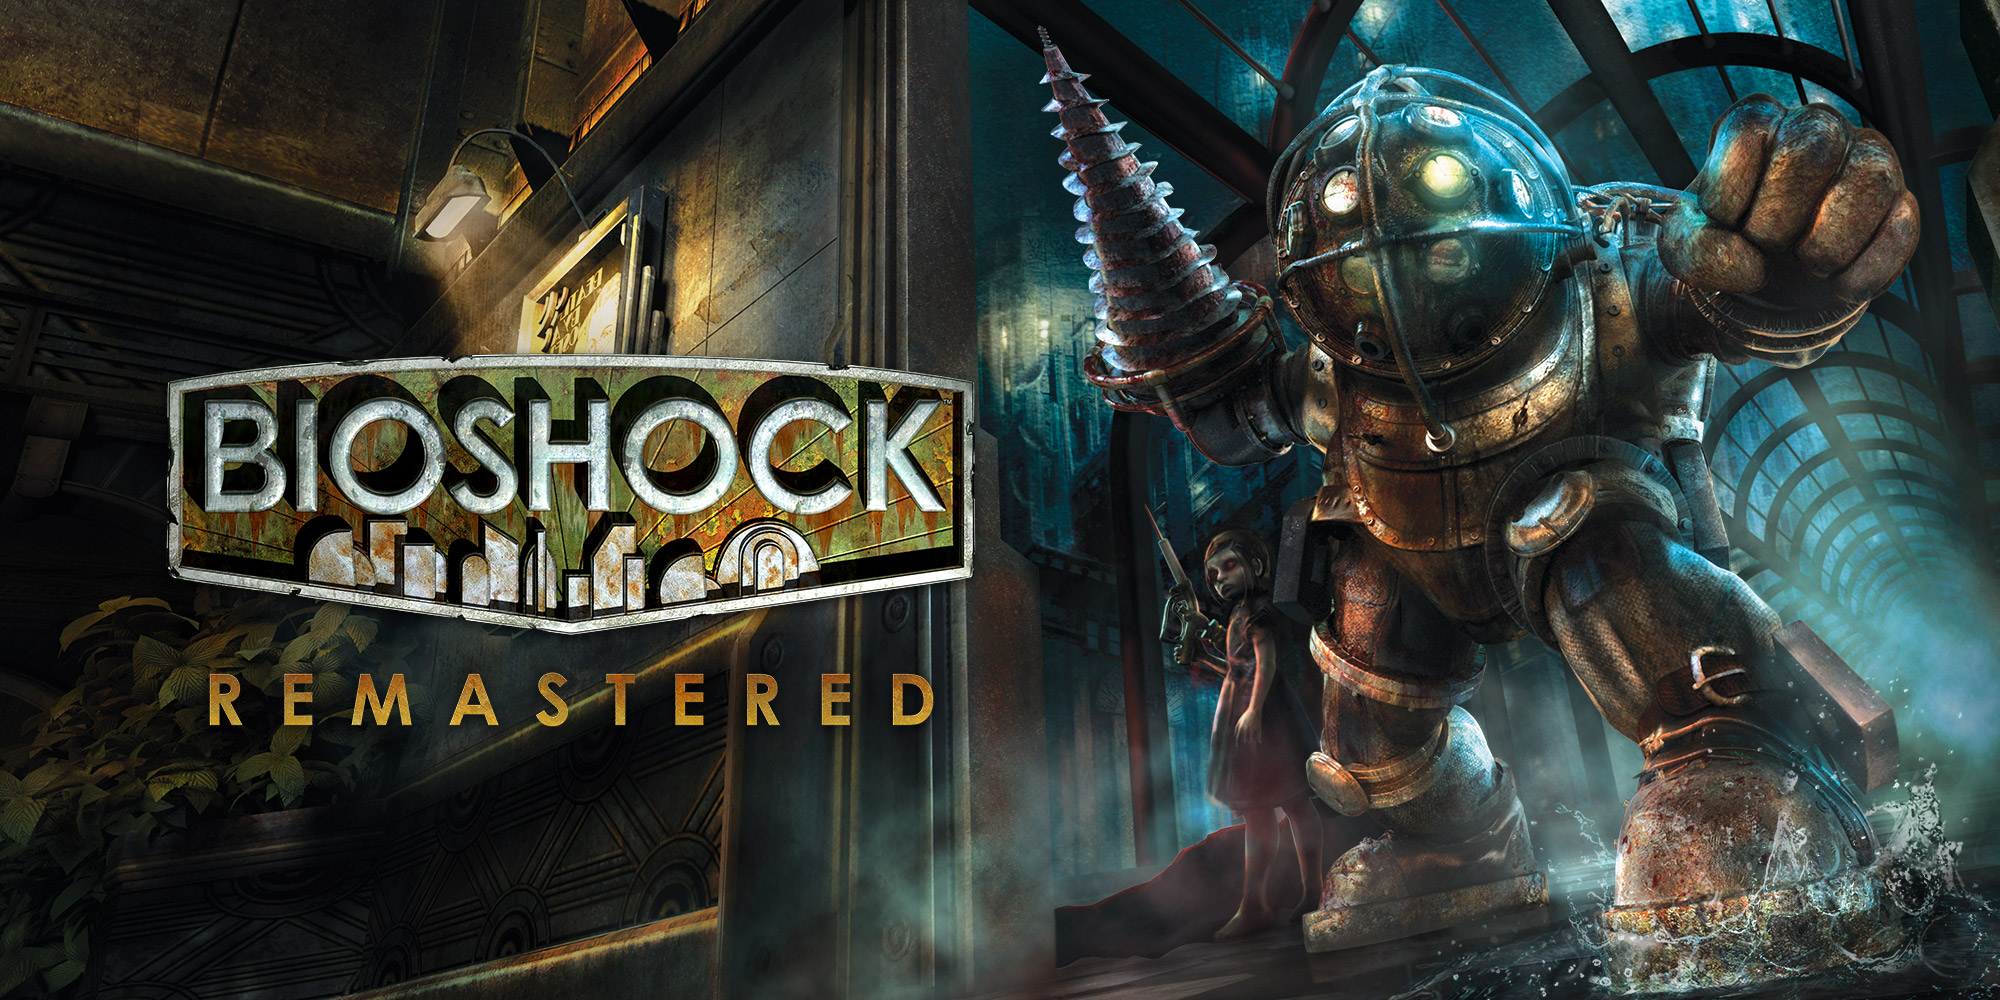 According to reports Bioshock is currently in development